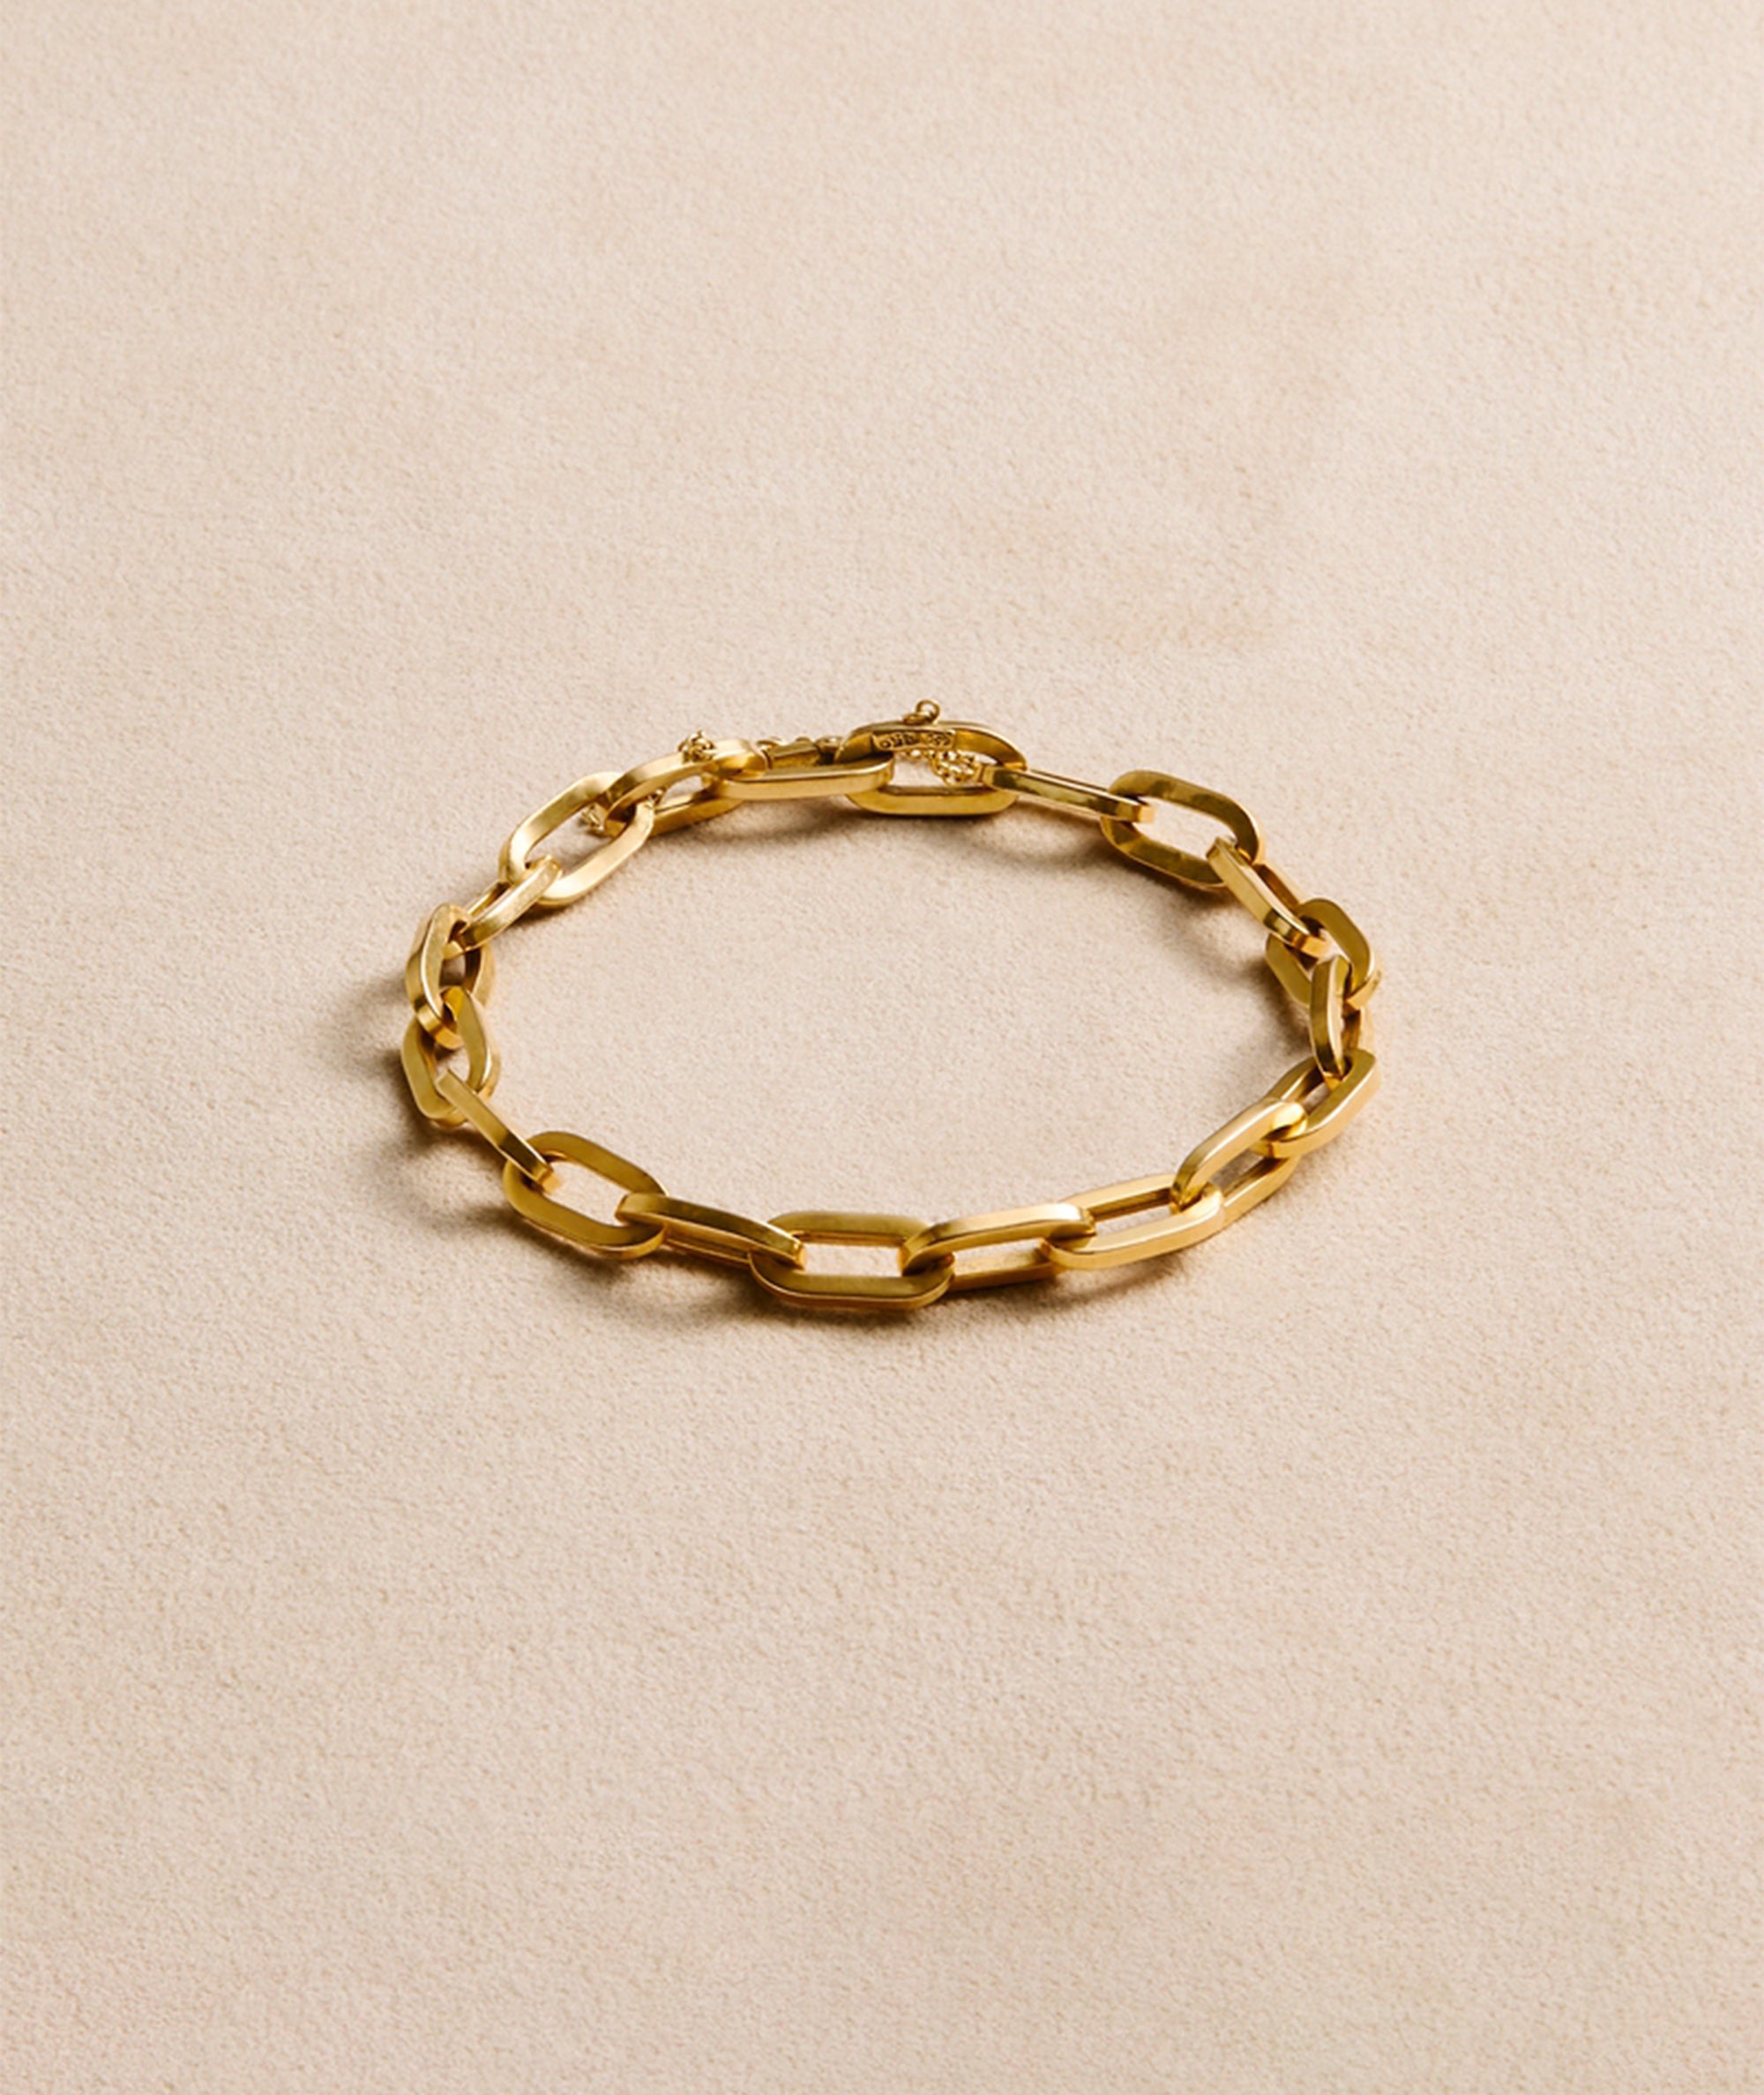 Vintage chain bracelet in yellow gold. Exclusively sourced for EREDE Curated.